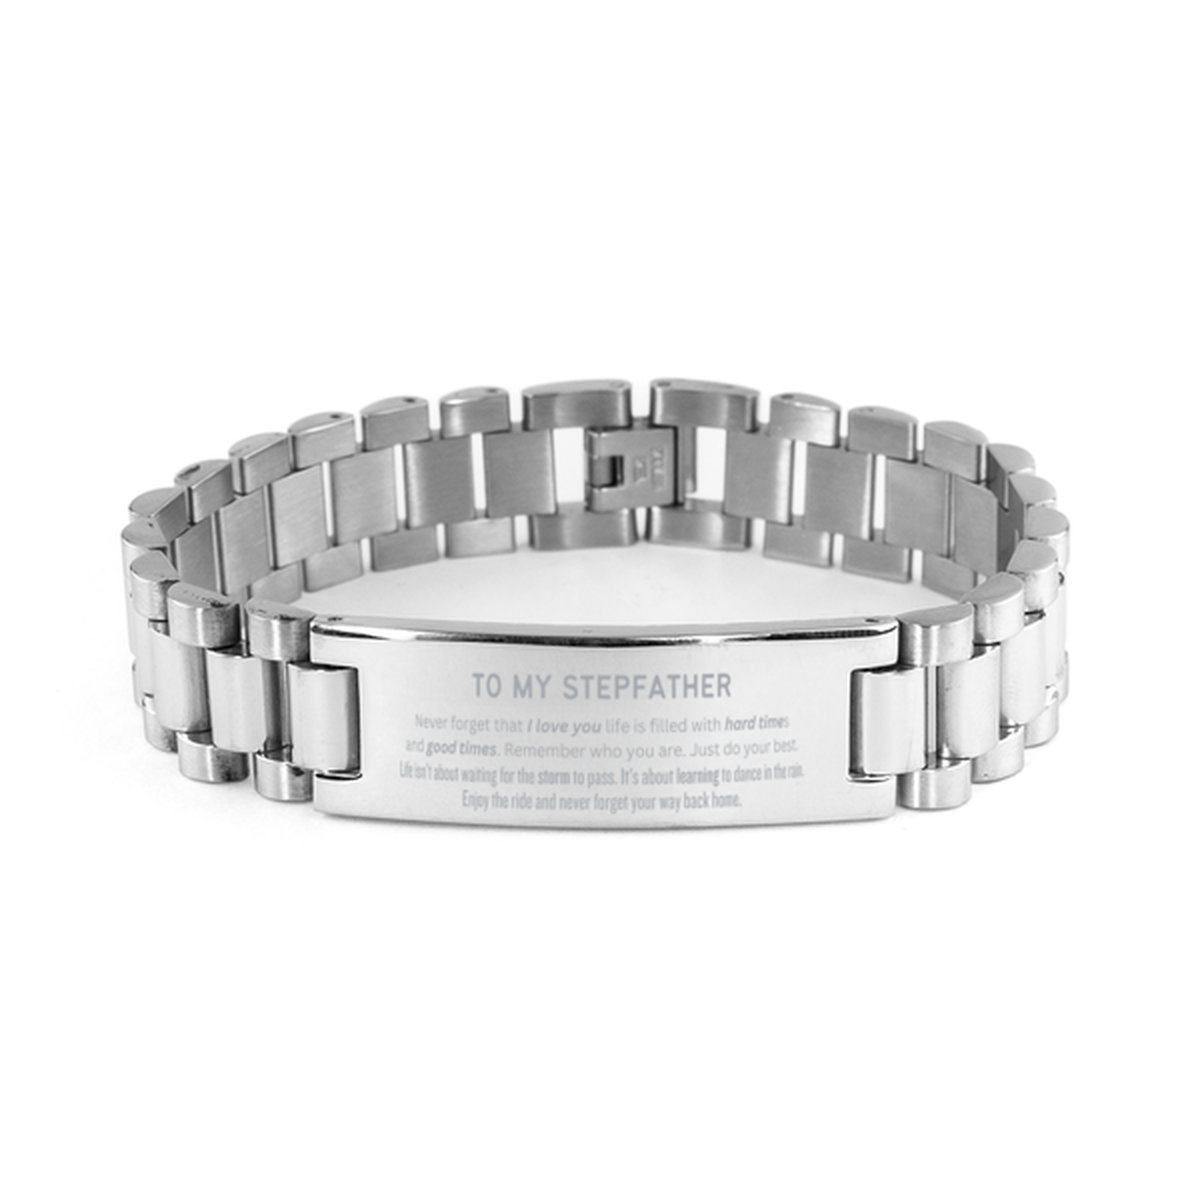 Christmas Stepfather Ladder Stainless Steel Bracelet Gifts, To My Stepfather Birthday Thank You Gifts For Stepfather, Graduation Unique Gifts For Stepfather To My Stepfather Never forget that I love you life is filled with hard times and good times. Remem